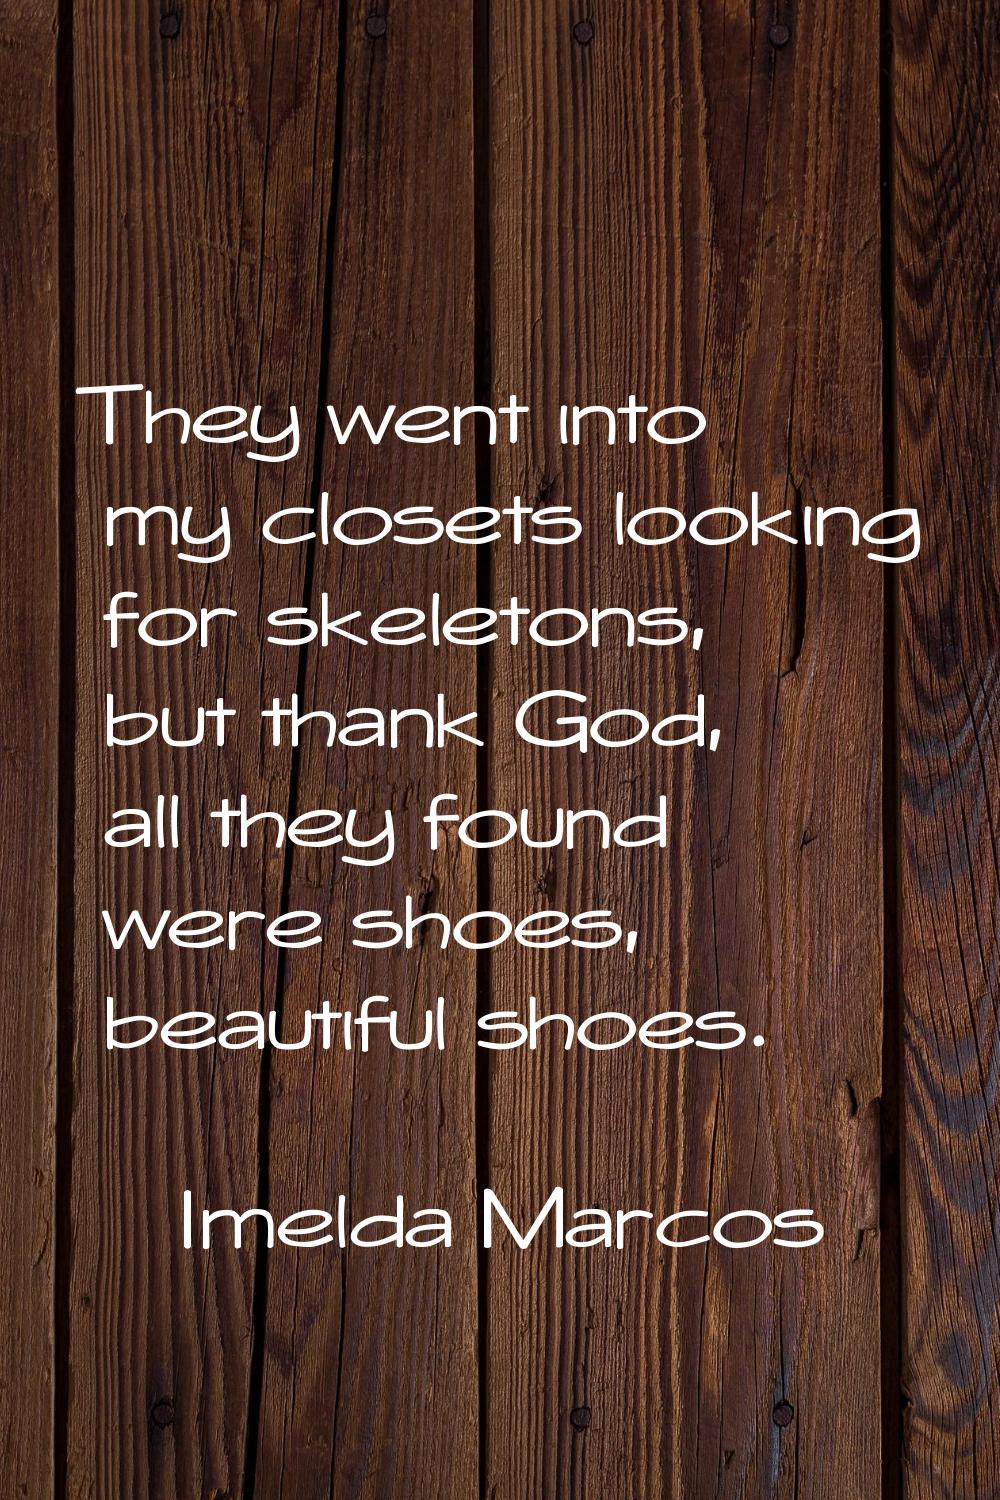 They went into my closets looking for skeletons, but thank God, all they found were shoes, beautifu